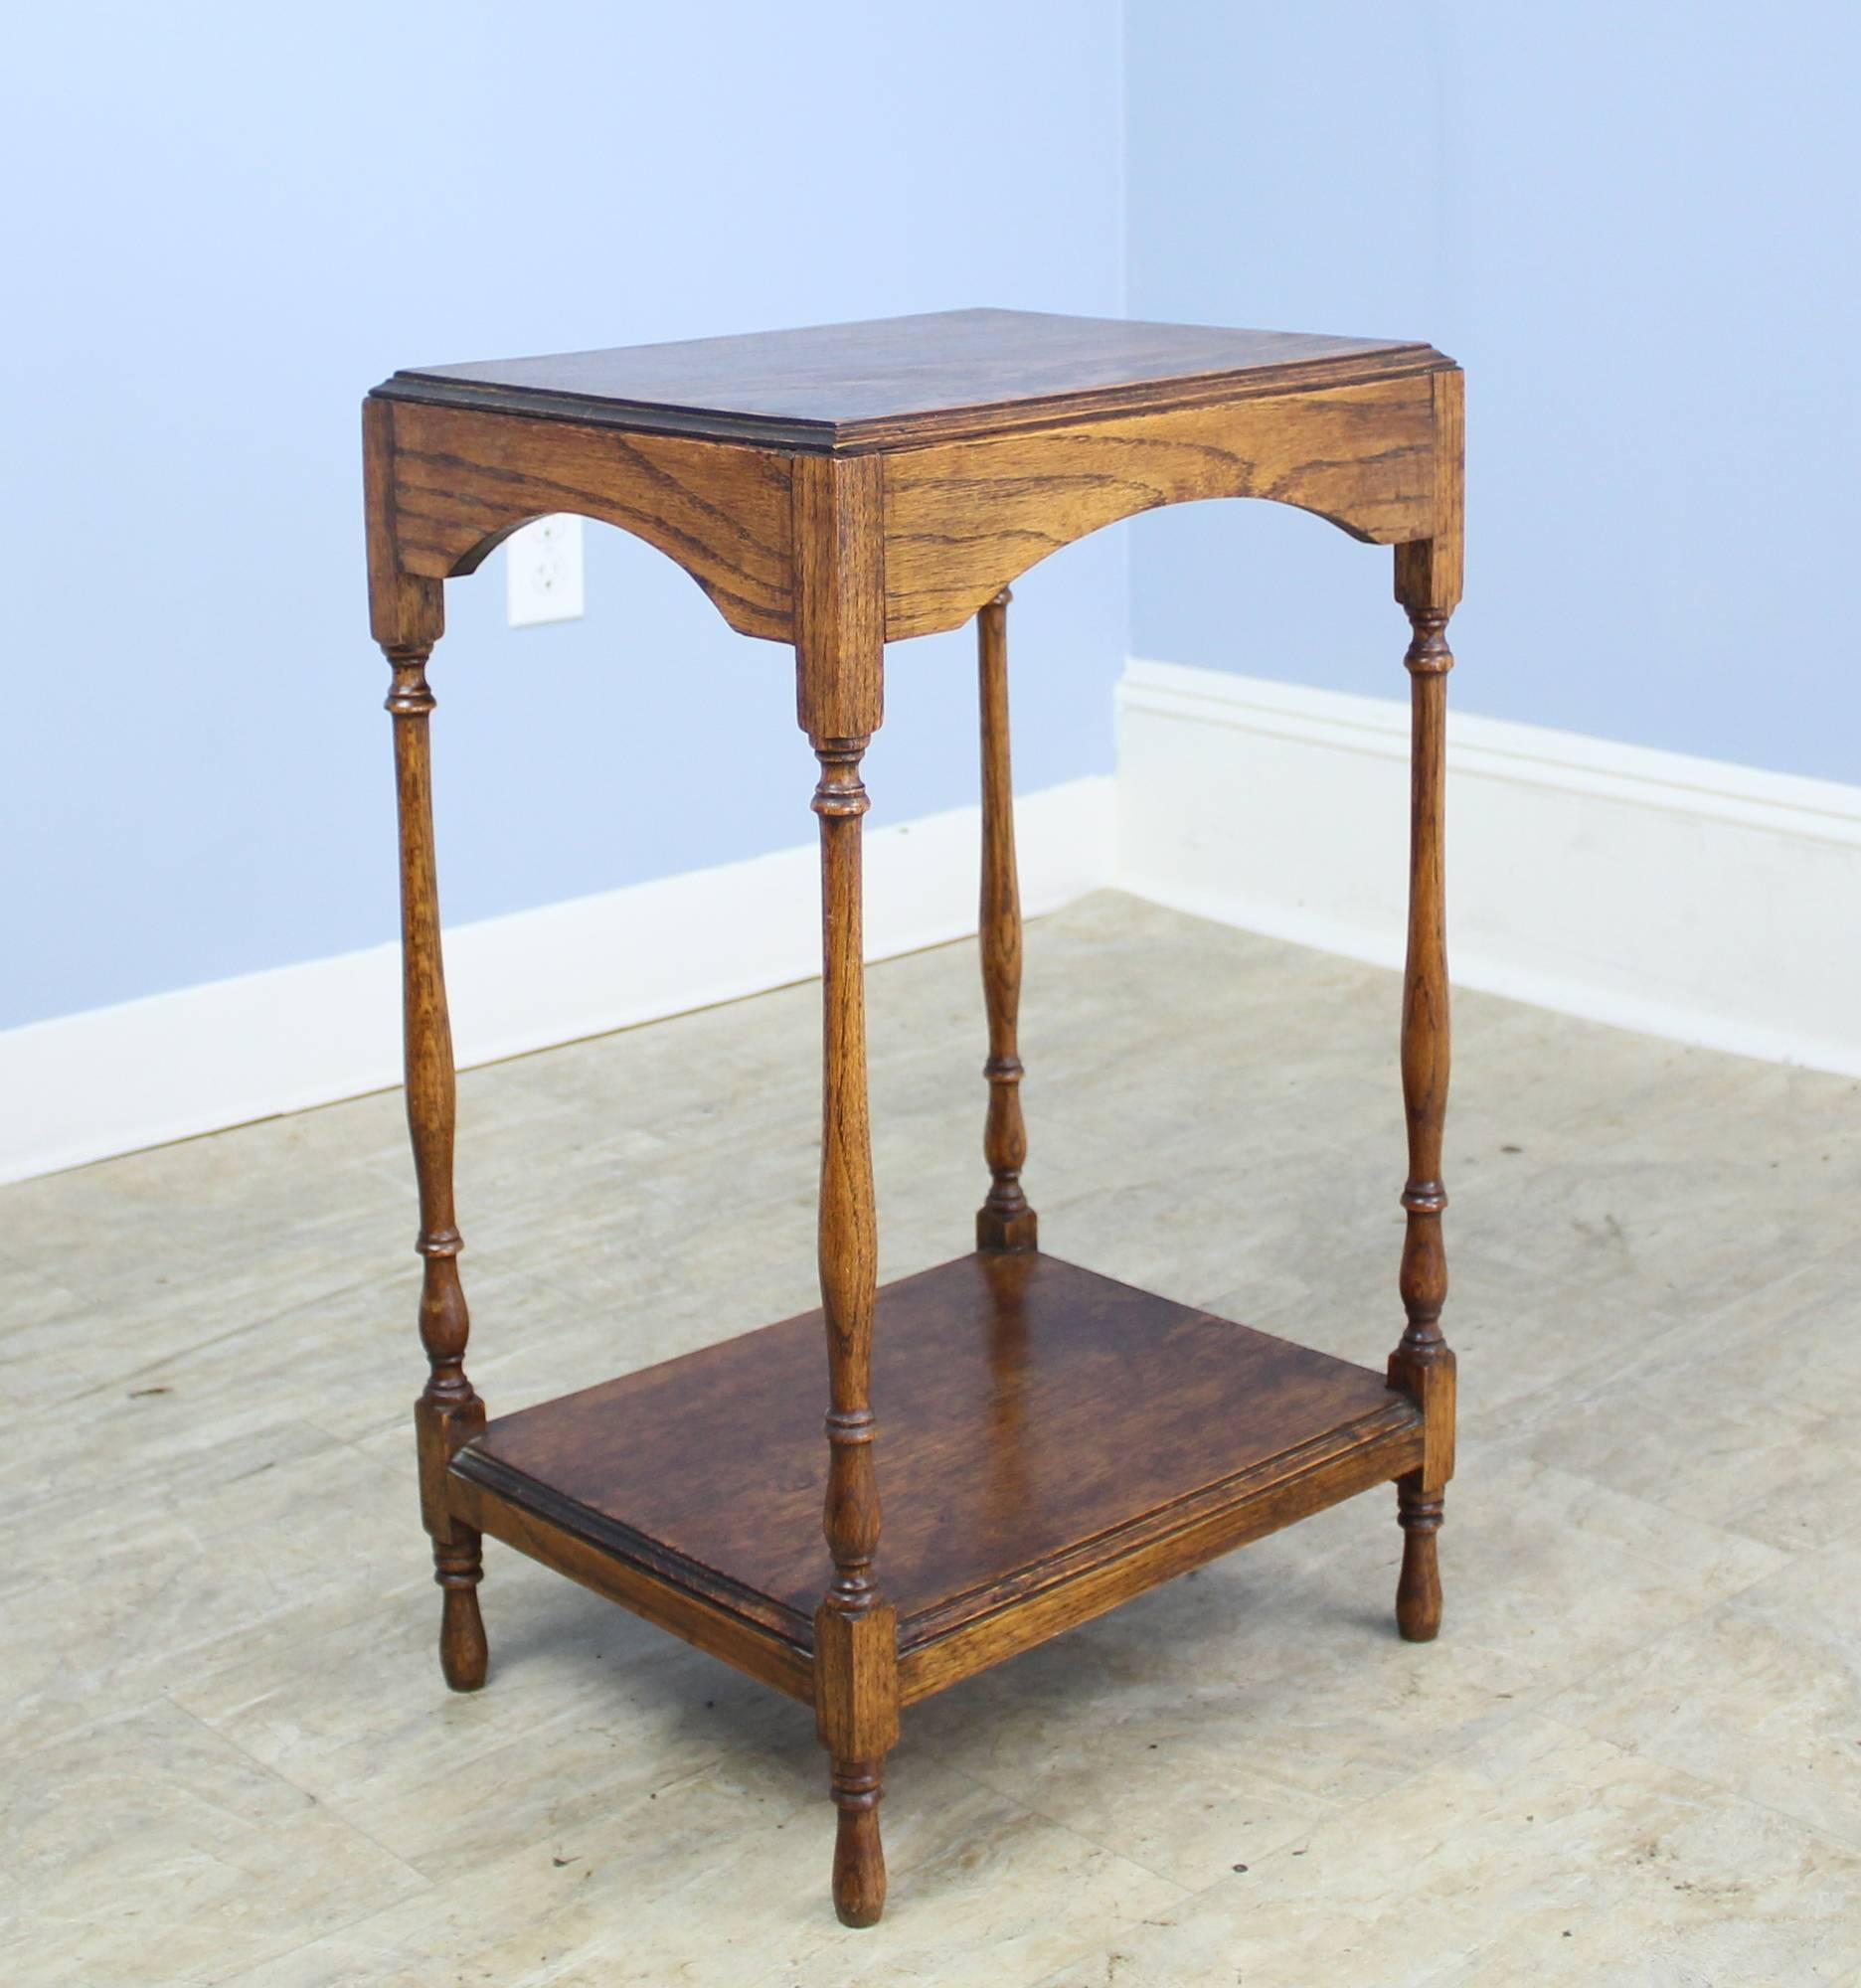 A charming oak side, lamp, or occasional table, with a lovely grained top and delicate turned legs. This piece is in very good antique condition.